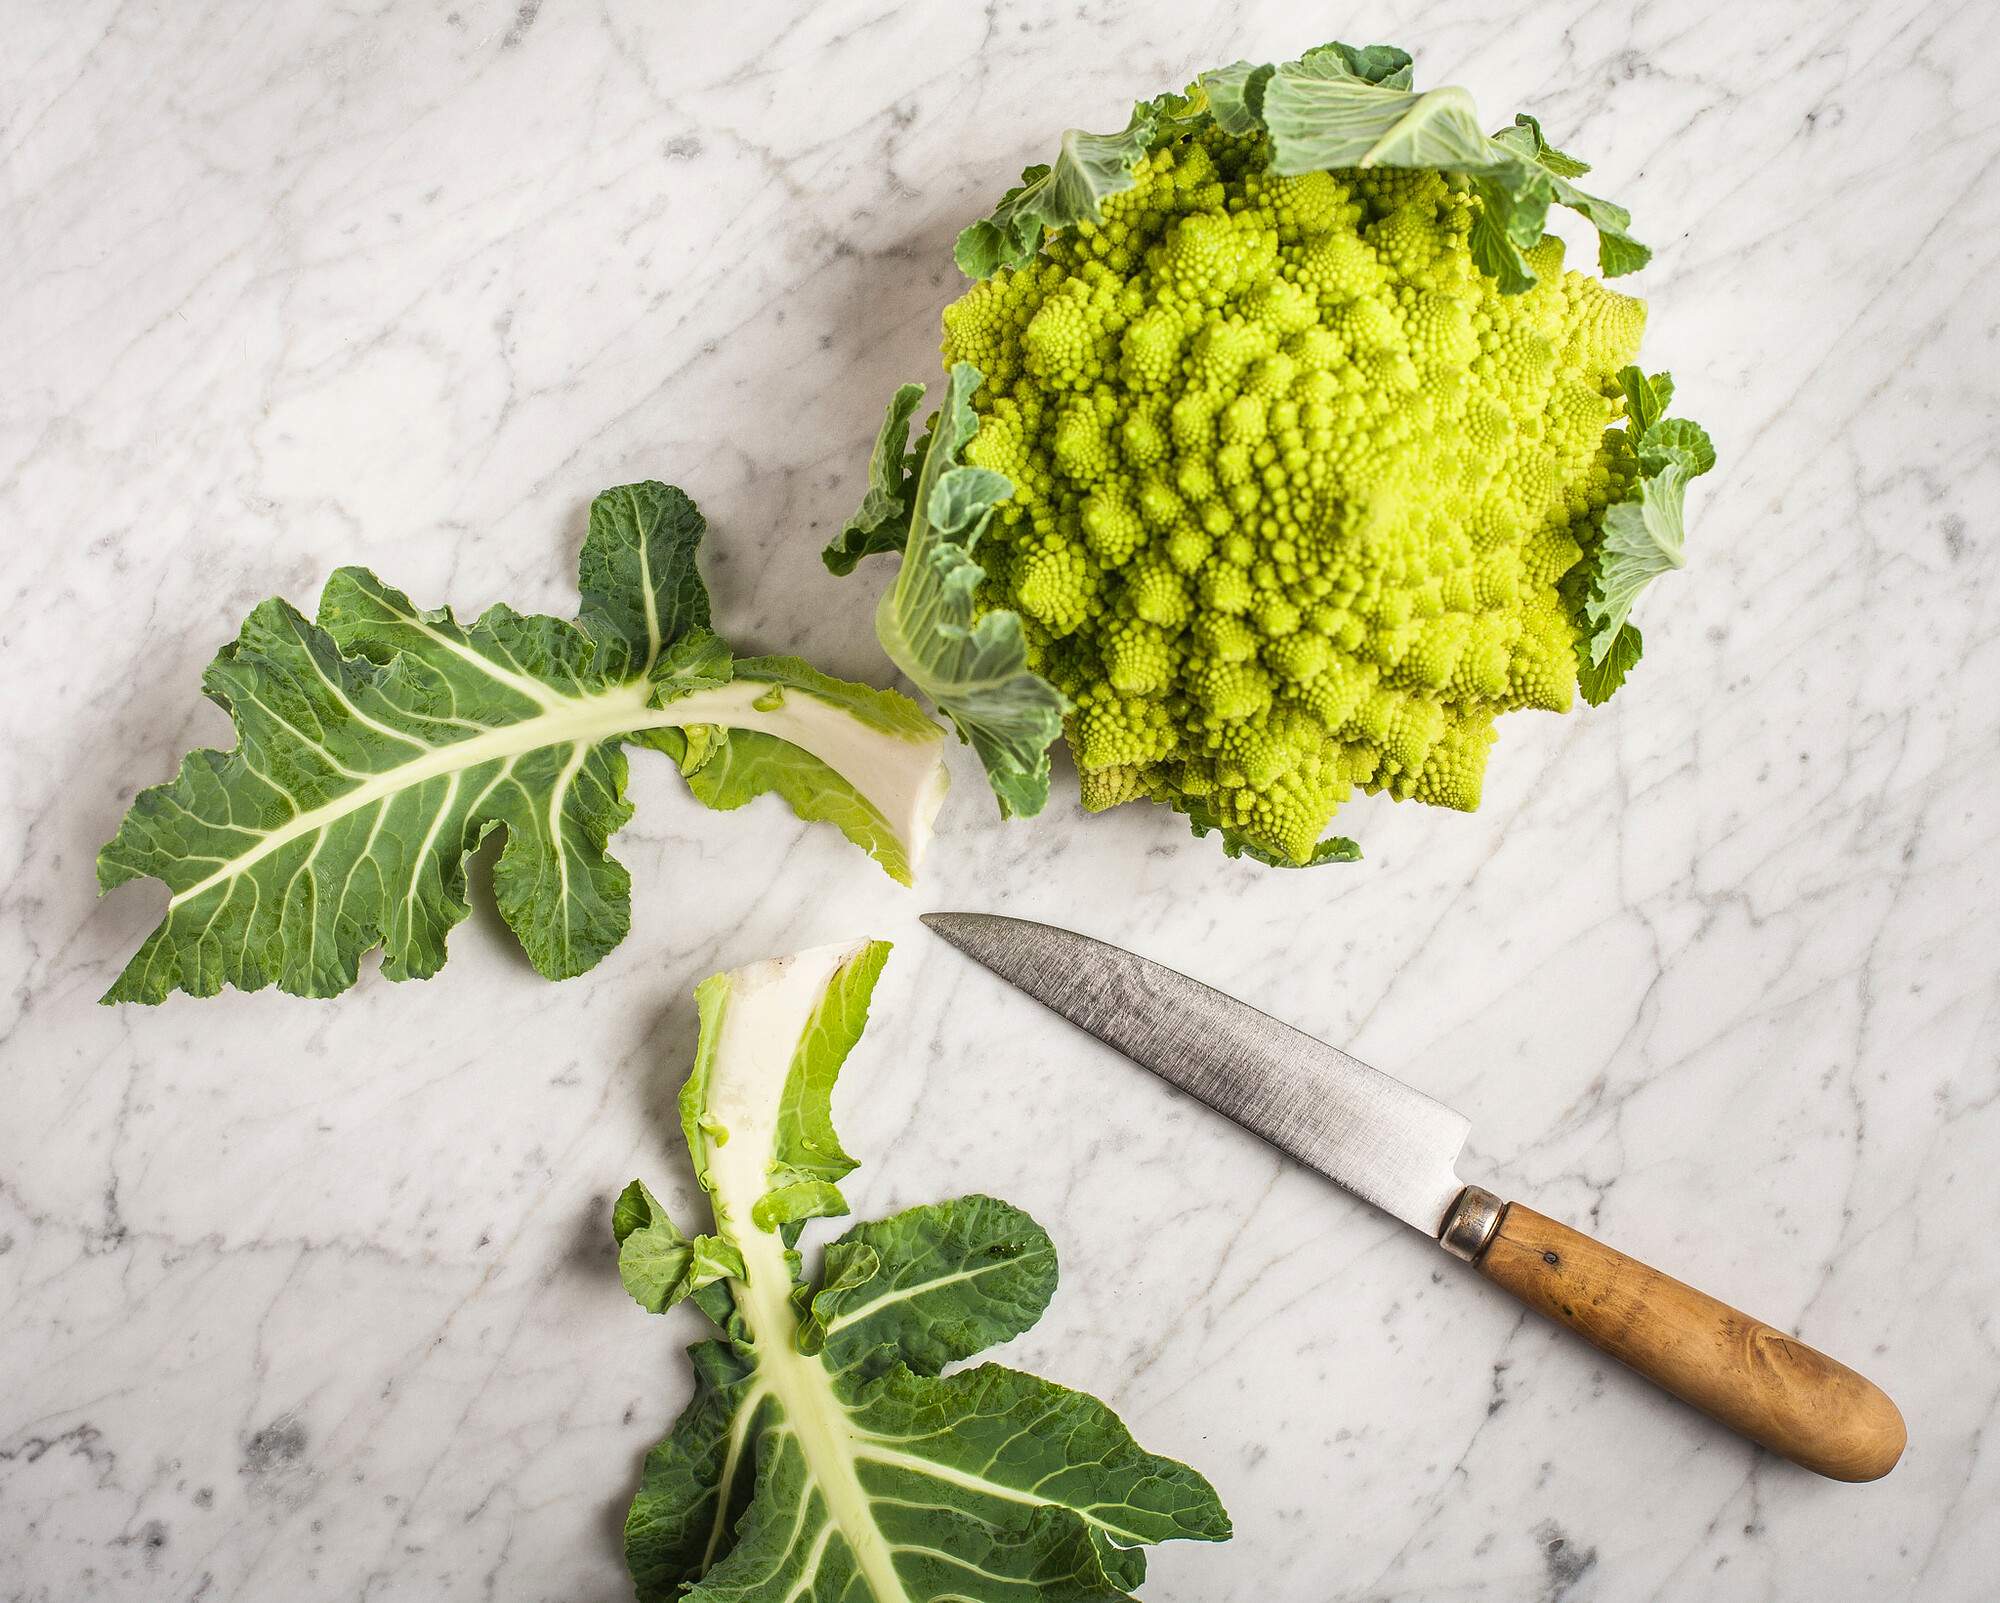 Time to look inside a Romanesco